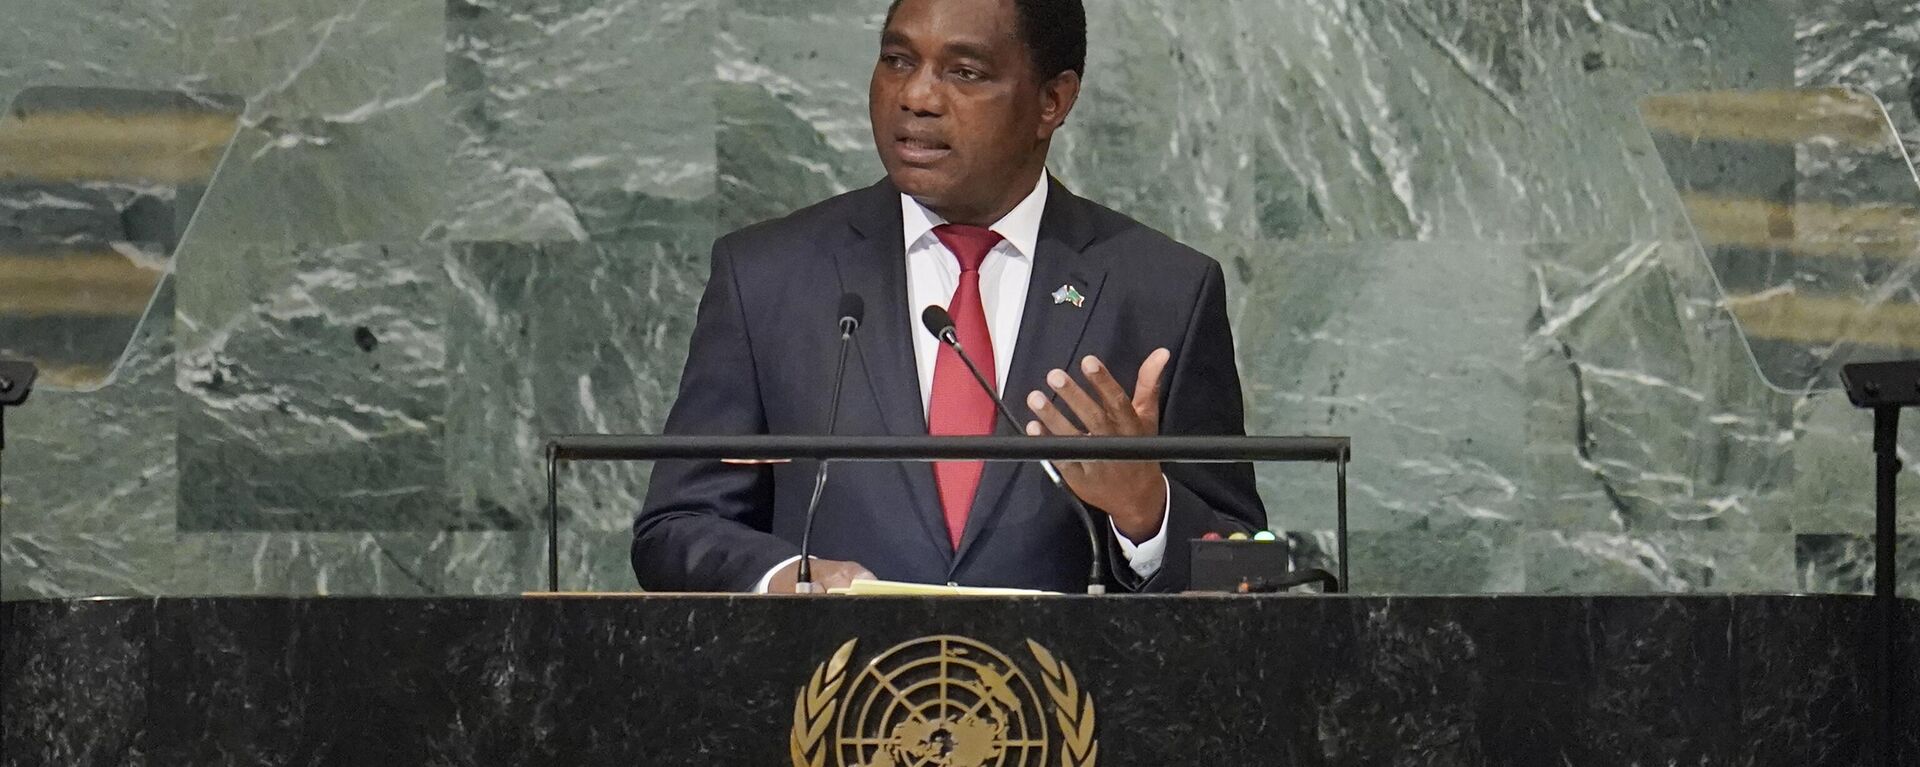 President of Zambia Hakainde Hichilema addresses the 77th session of the United Nations General Assembly, Wednesday, Sept. 21, 2022, at U.N. headquarters.  - Sputnik International, 1920, 05.03.2023